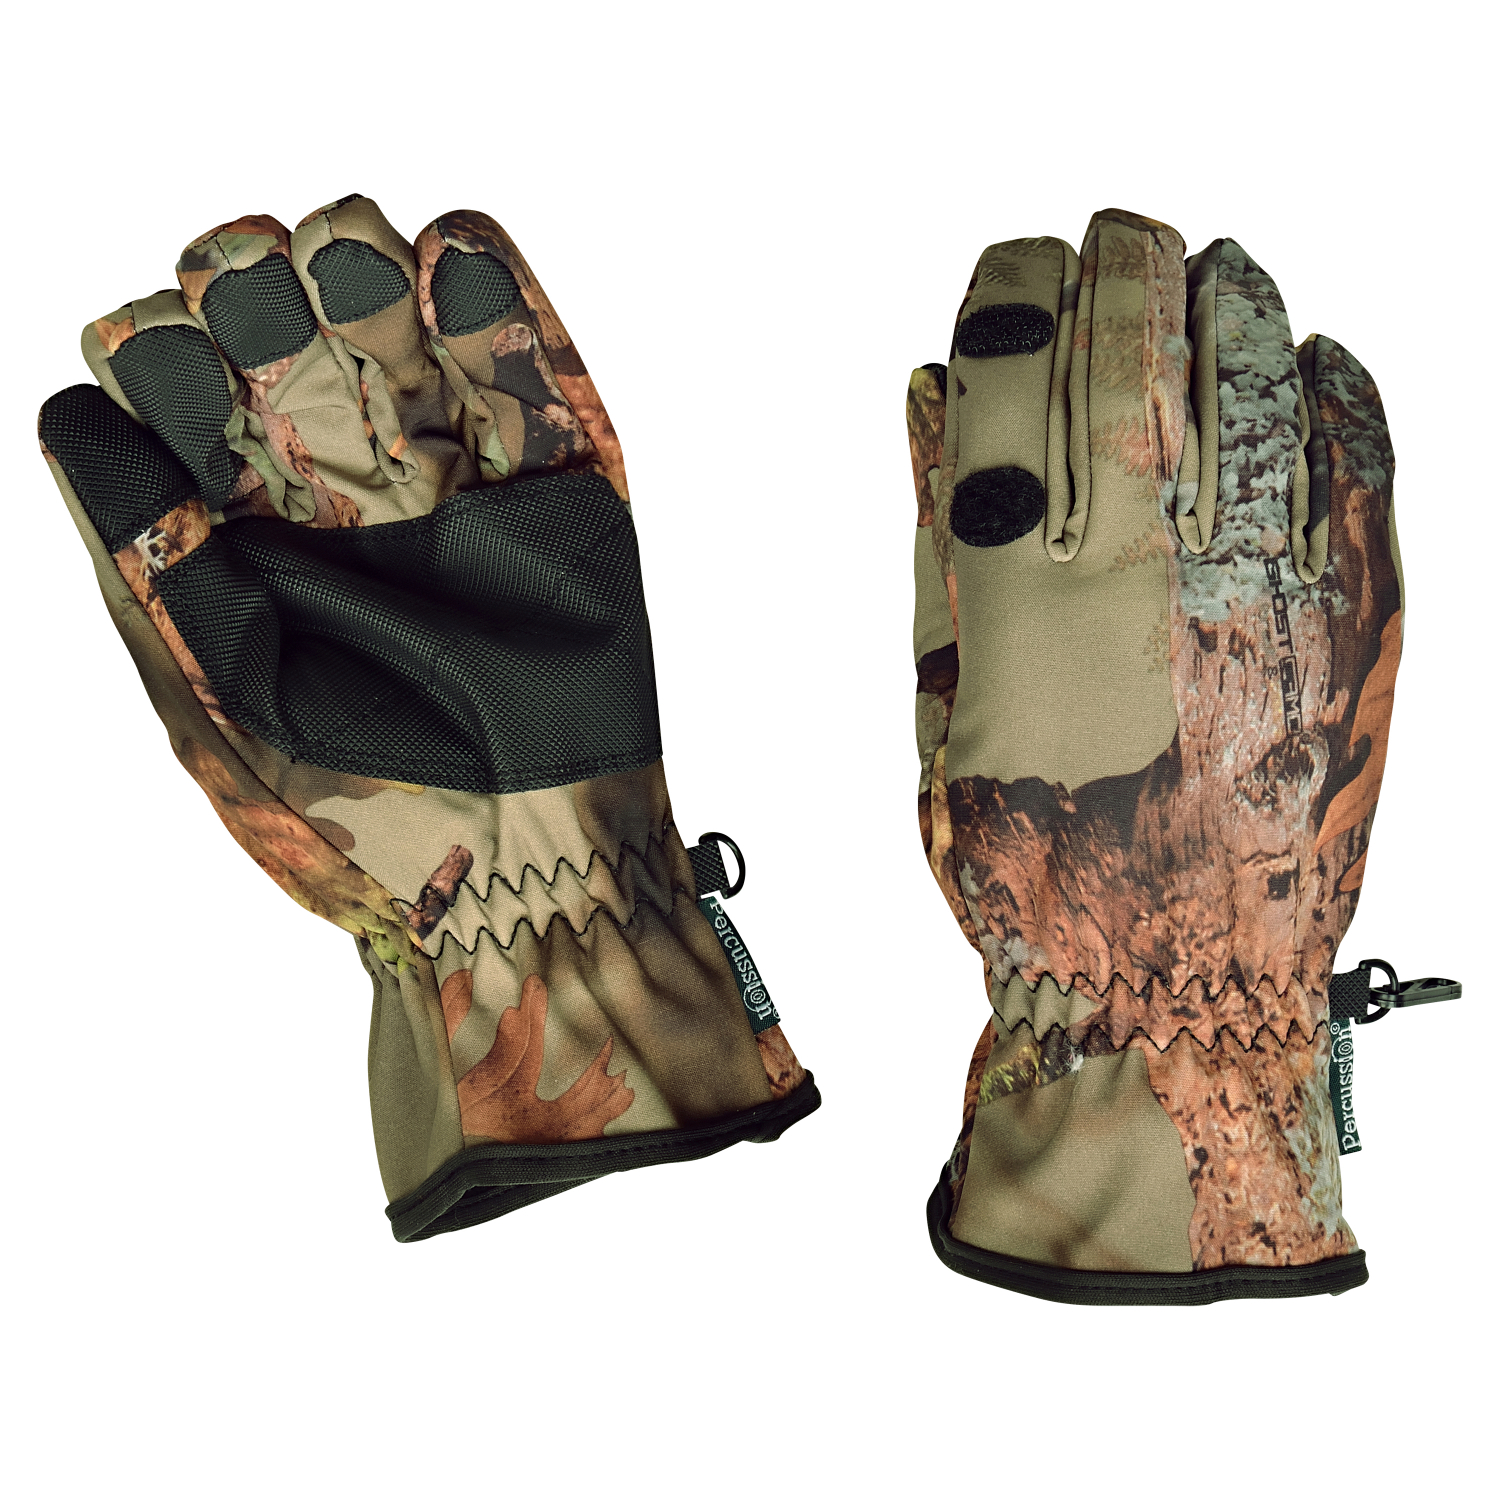 Percussion Unisex Hunting Glove 